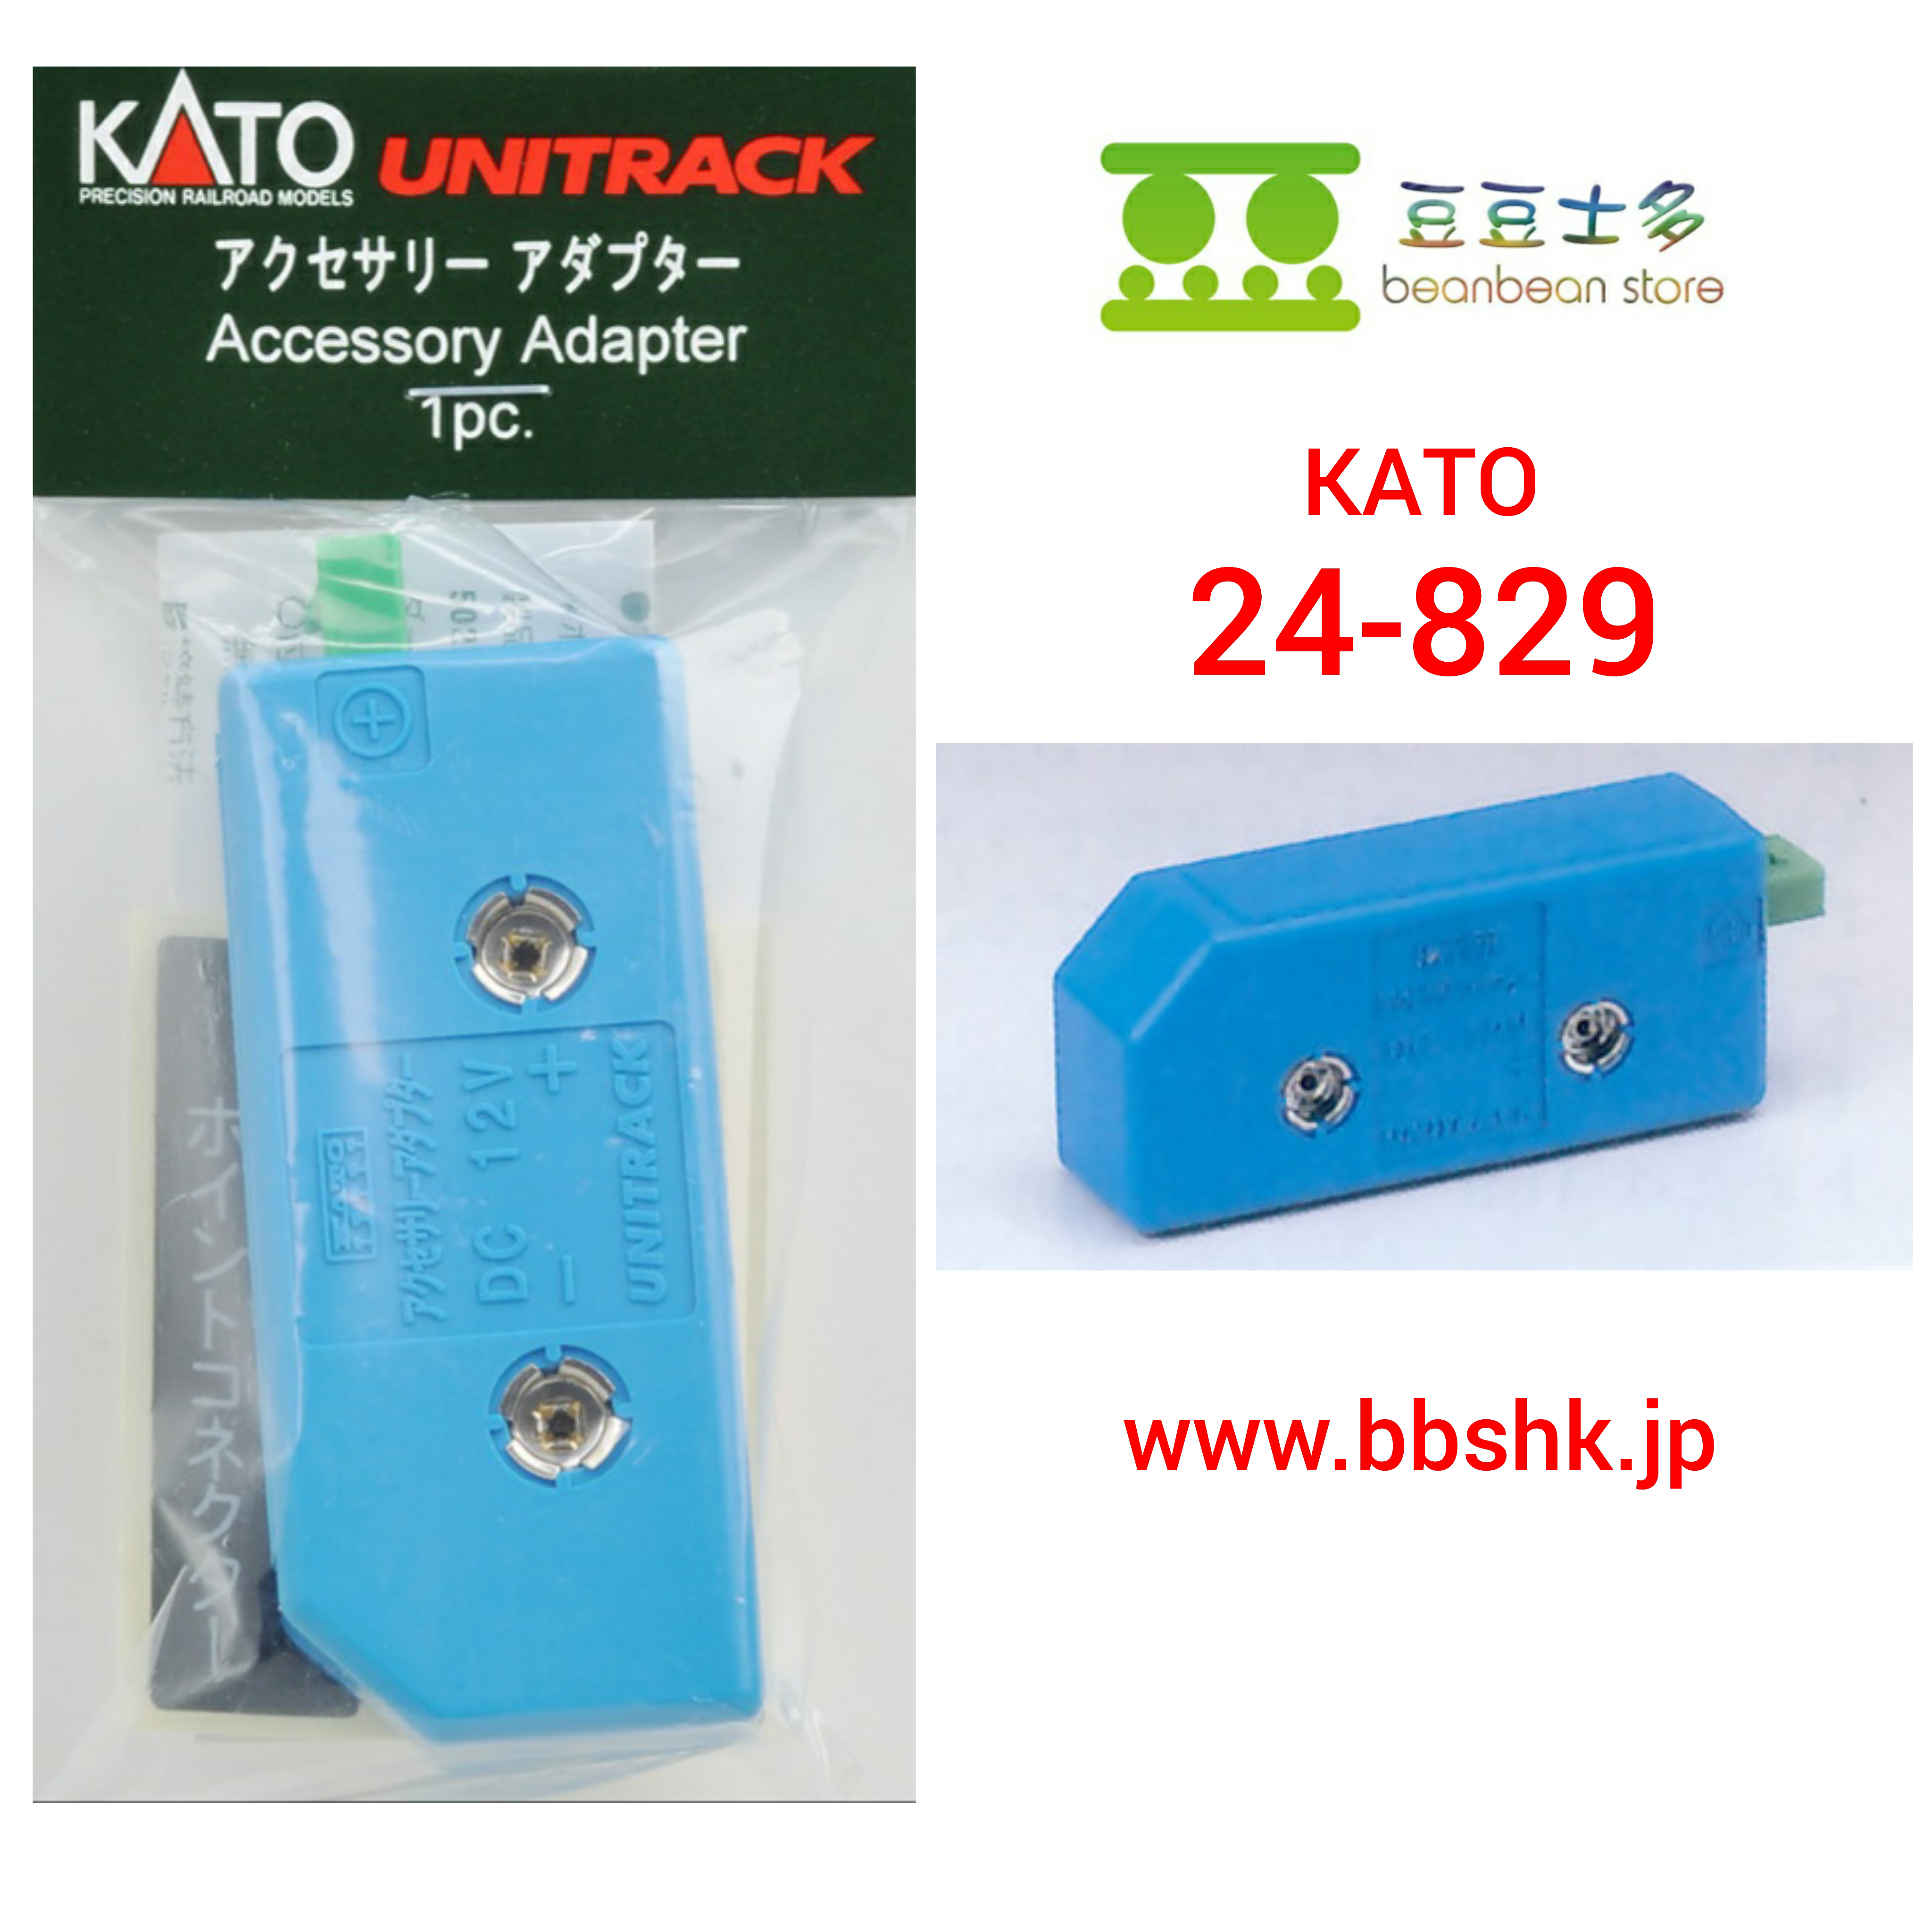 Kato 24-829 HO Scale or N Scale Unitrack Accessory Adapter 1pc 